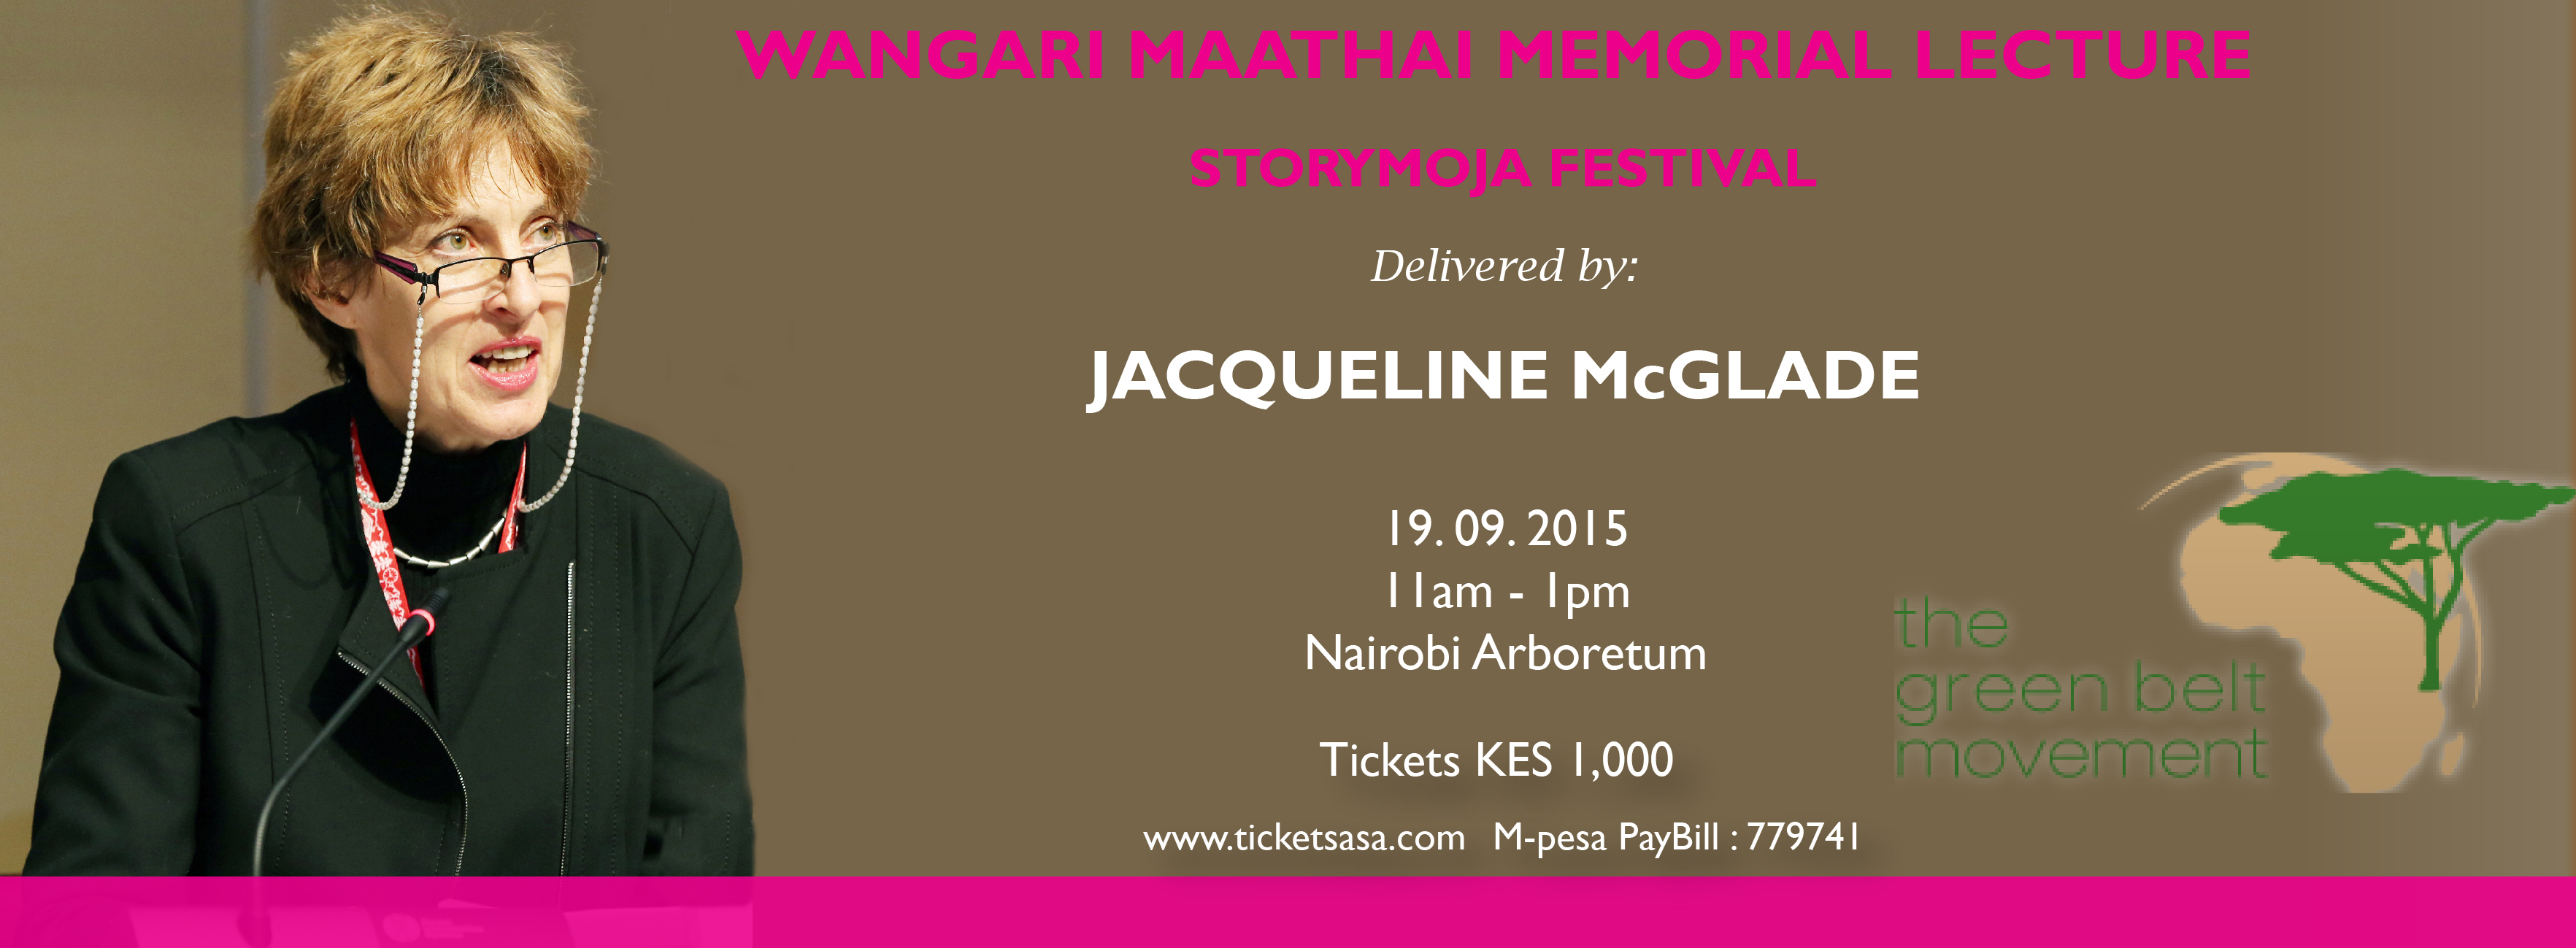 The Wangari Maathai Memorial Lecture delivered at @StorymojaFest by
UNEP’s Chief Scientist Jacqueline McGlade